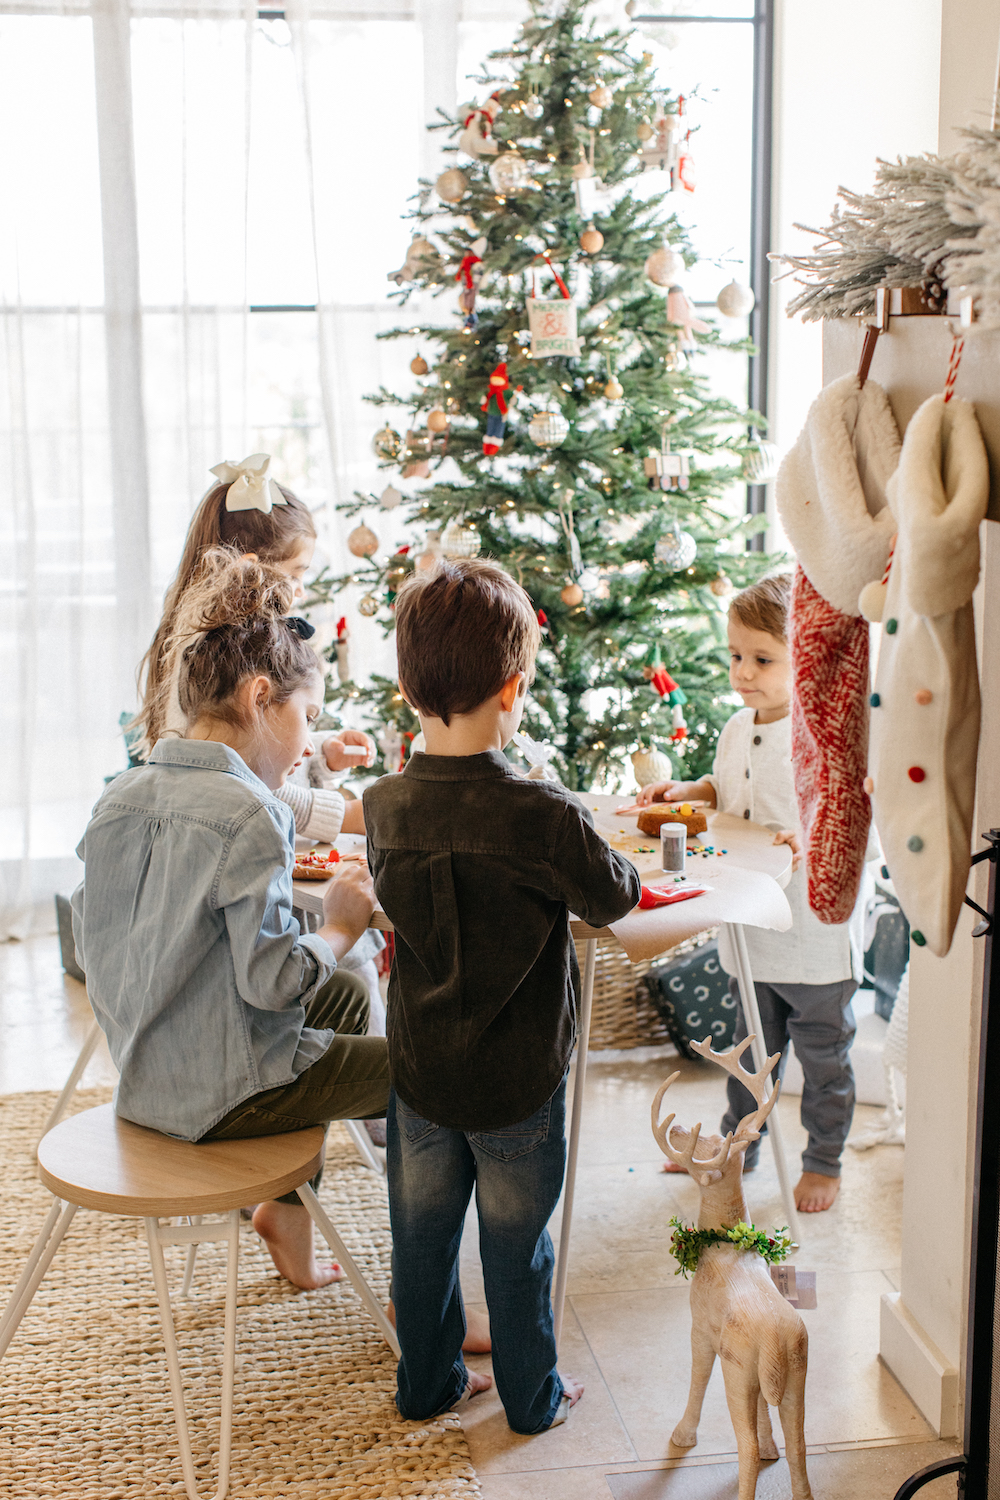 Camille hosts a gingerbread decorating party with Target for Christmas holiday 2019